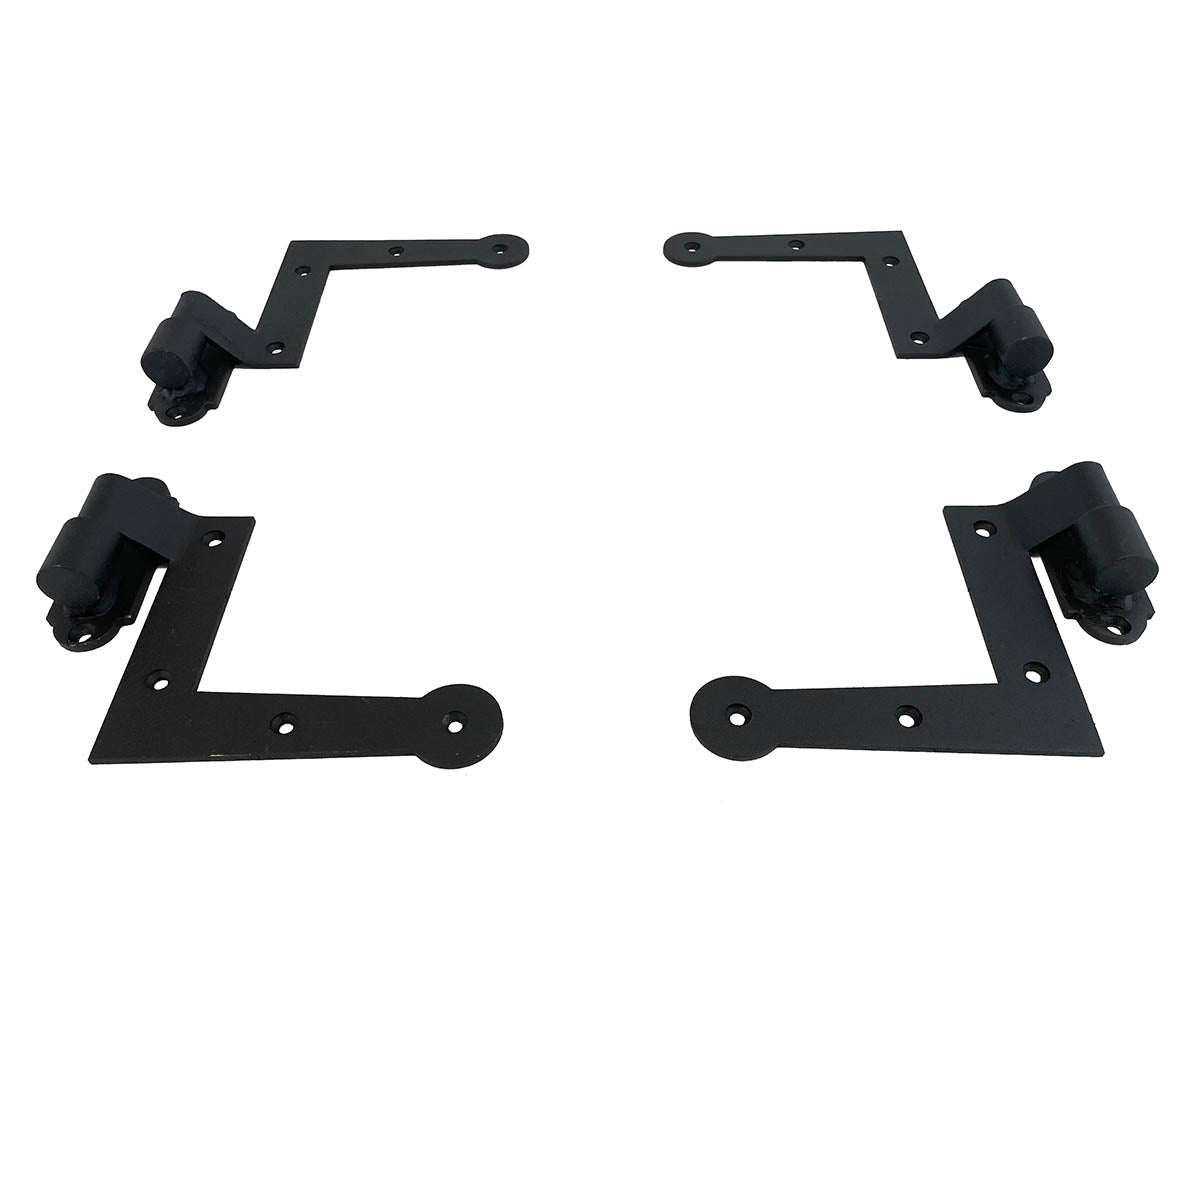 L Style Shutter Hinges - Stainless Steel NY Style Set - 3/4" Inch Offset - Black Powder Coat - Sold in Sets of 4 Hinges